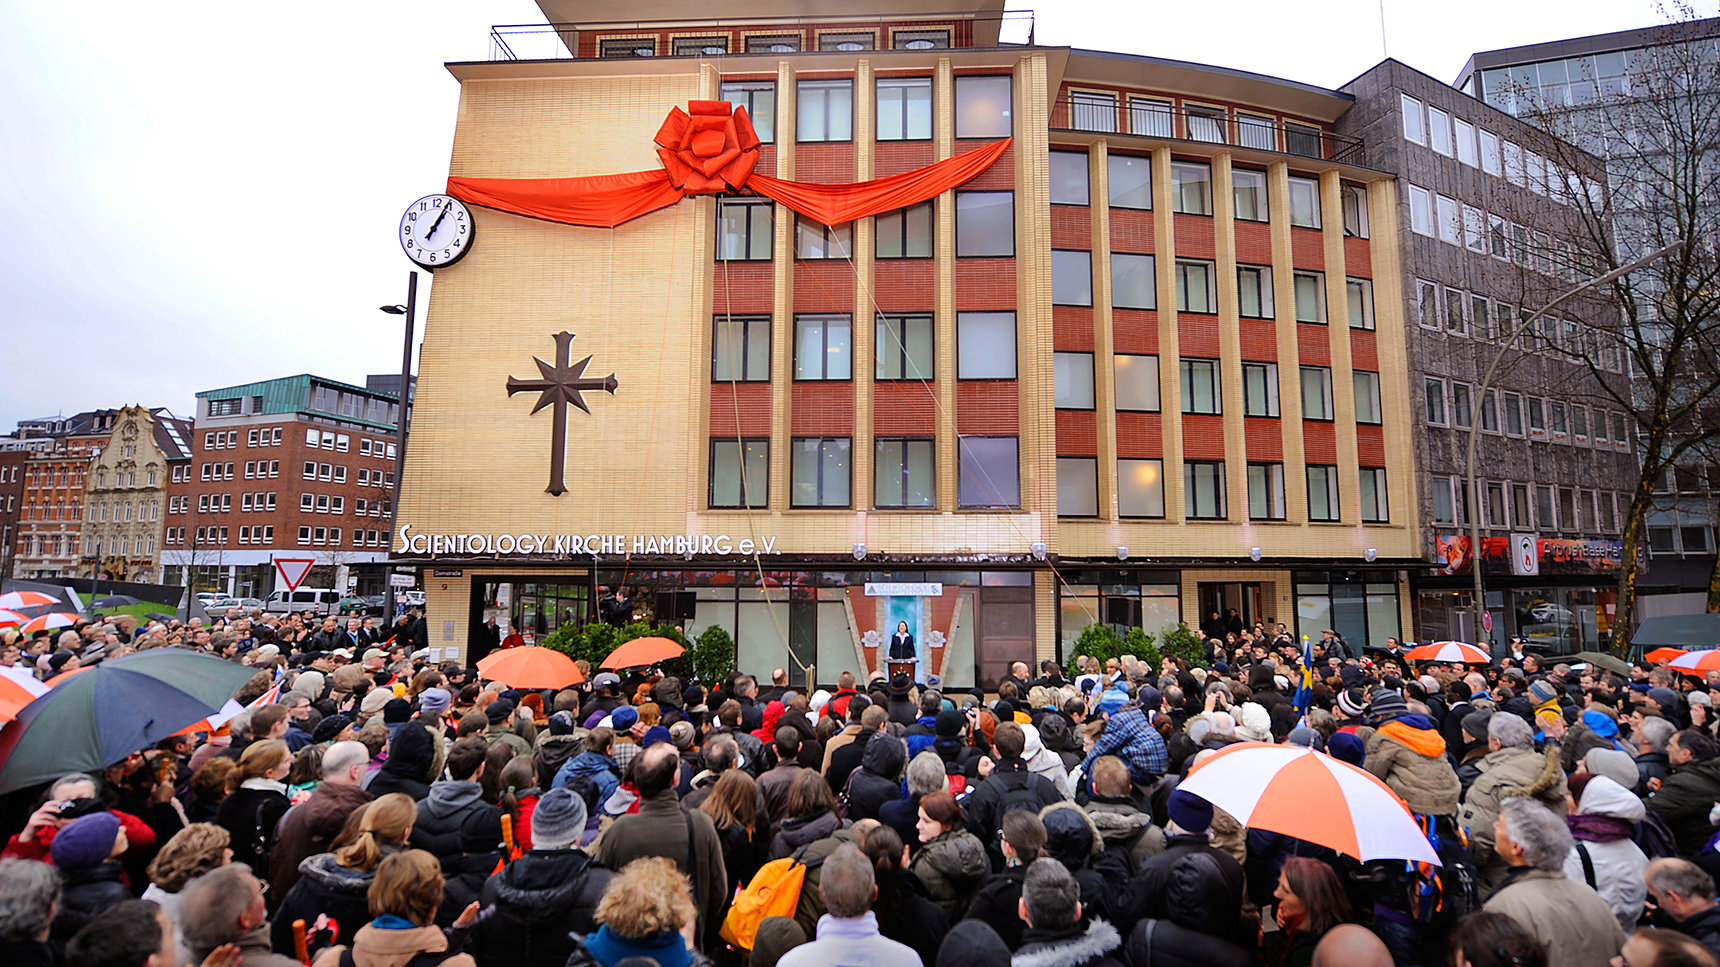 Scientology in Hamburg celebrates Half a Century of fighting for and winning Freedom for All